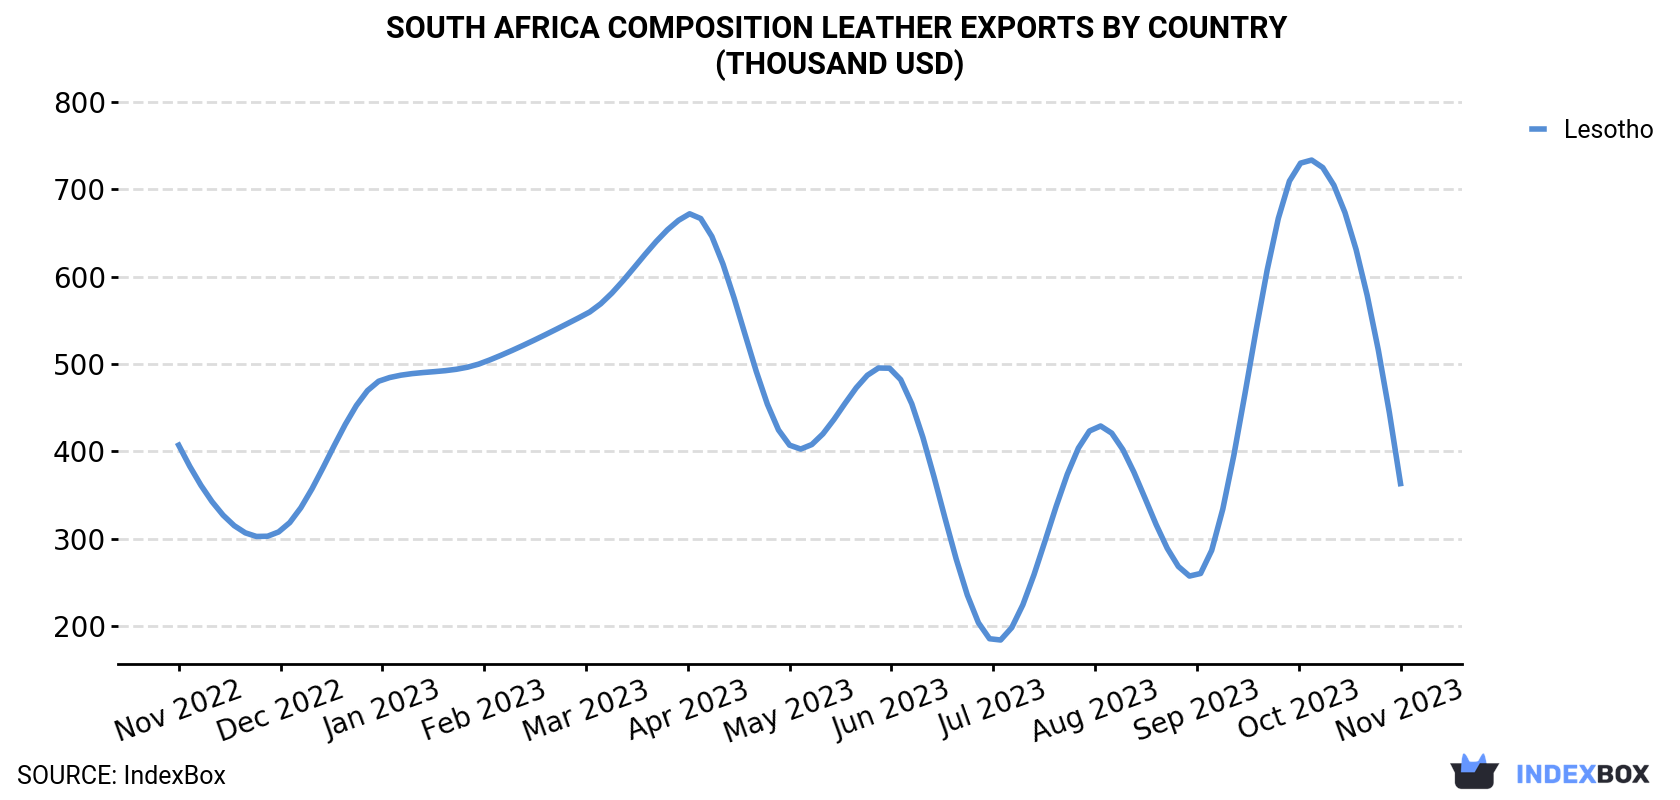 South Africa Composition Leather Exports By Country (Thousand USD)